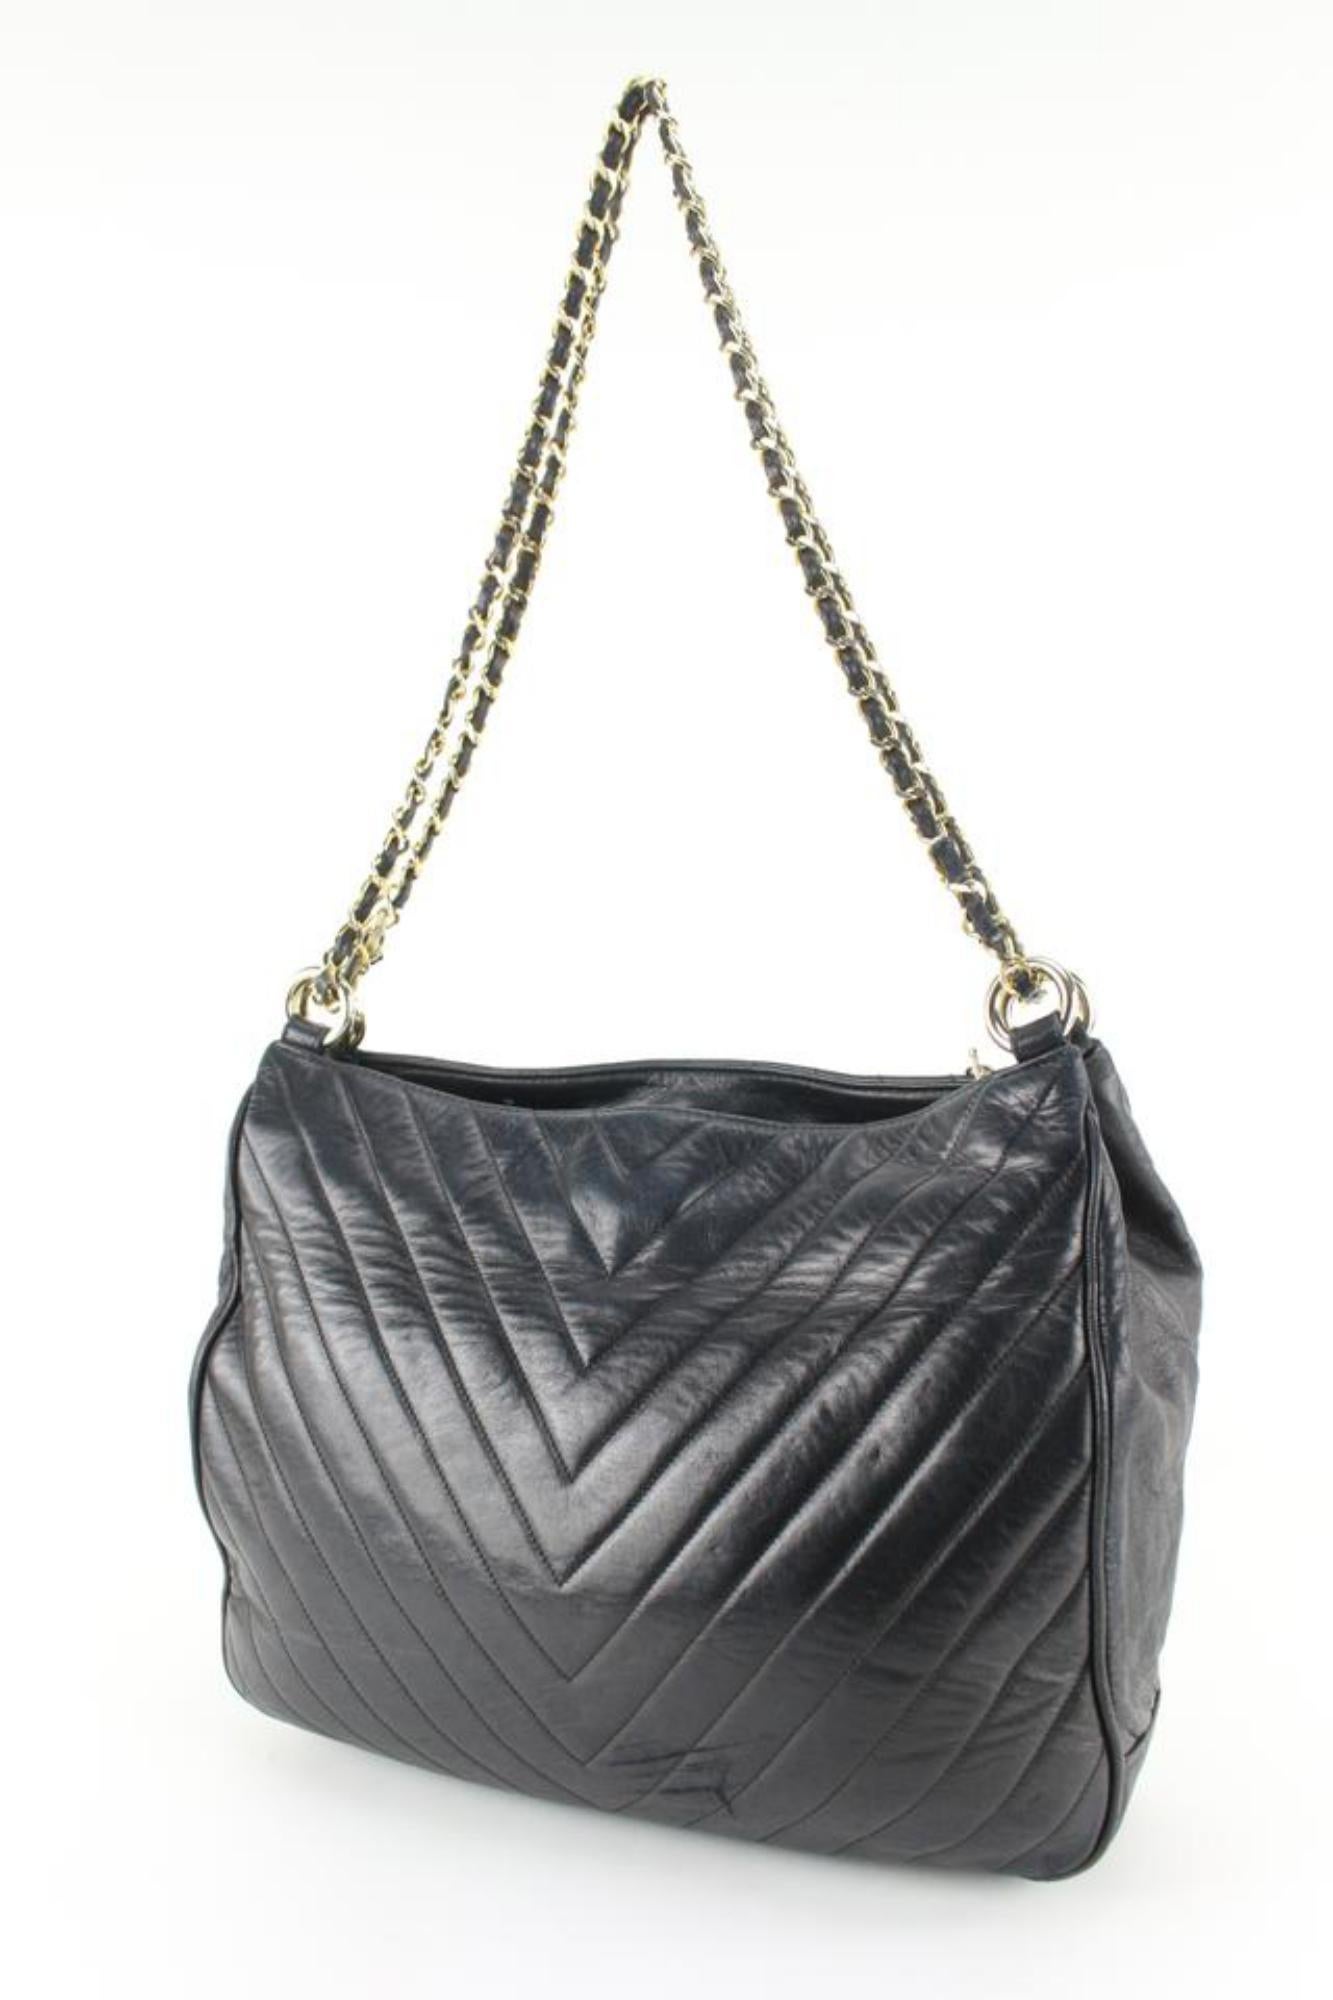 Chanel Quilted Chevron Lambskin Chain Shoulder Bag 60ck816s For Sale 3